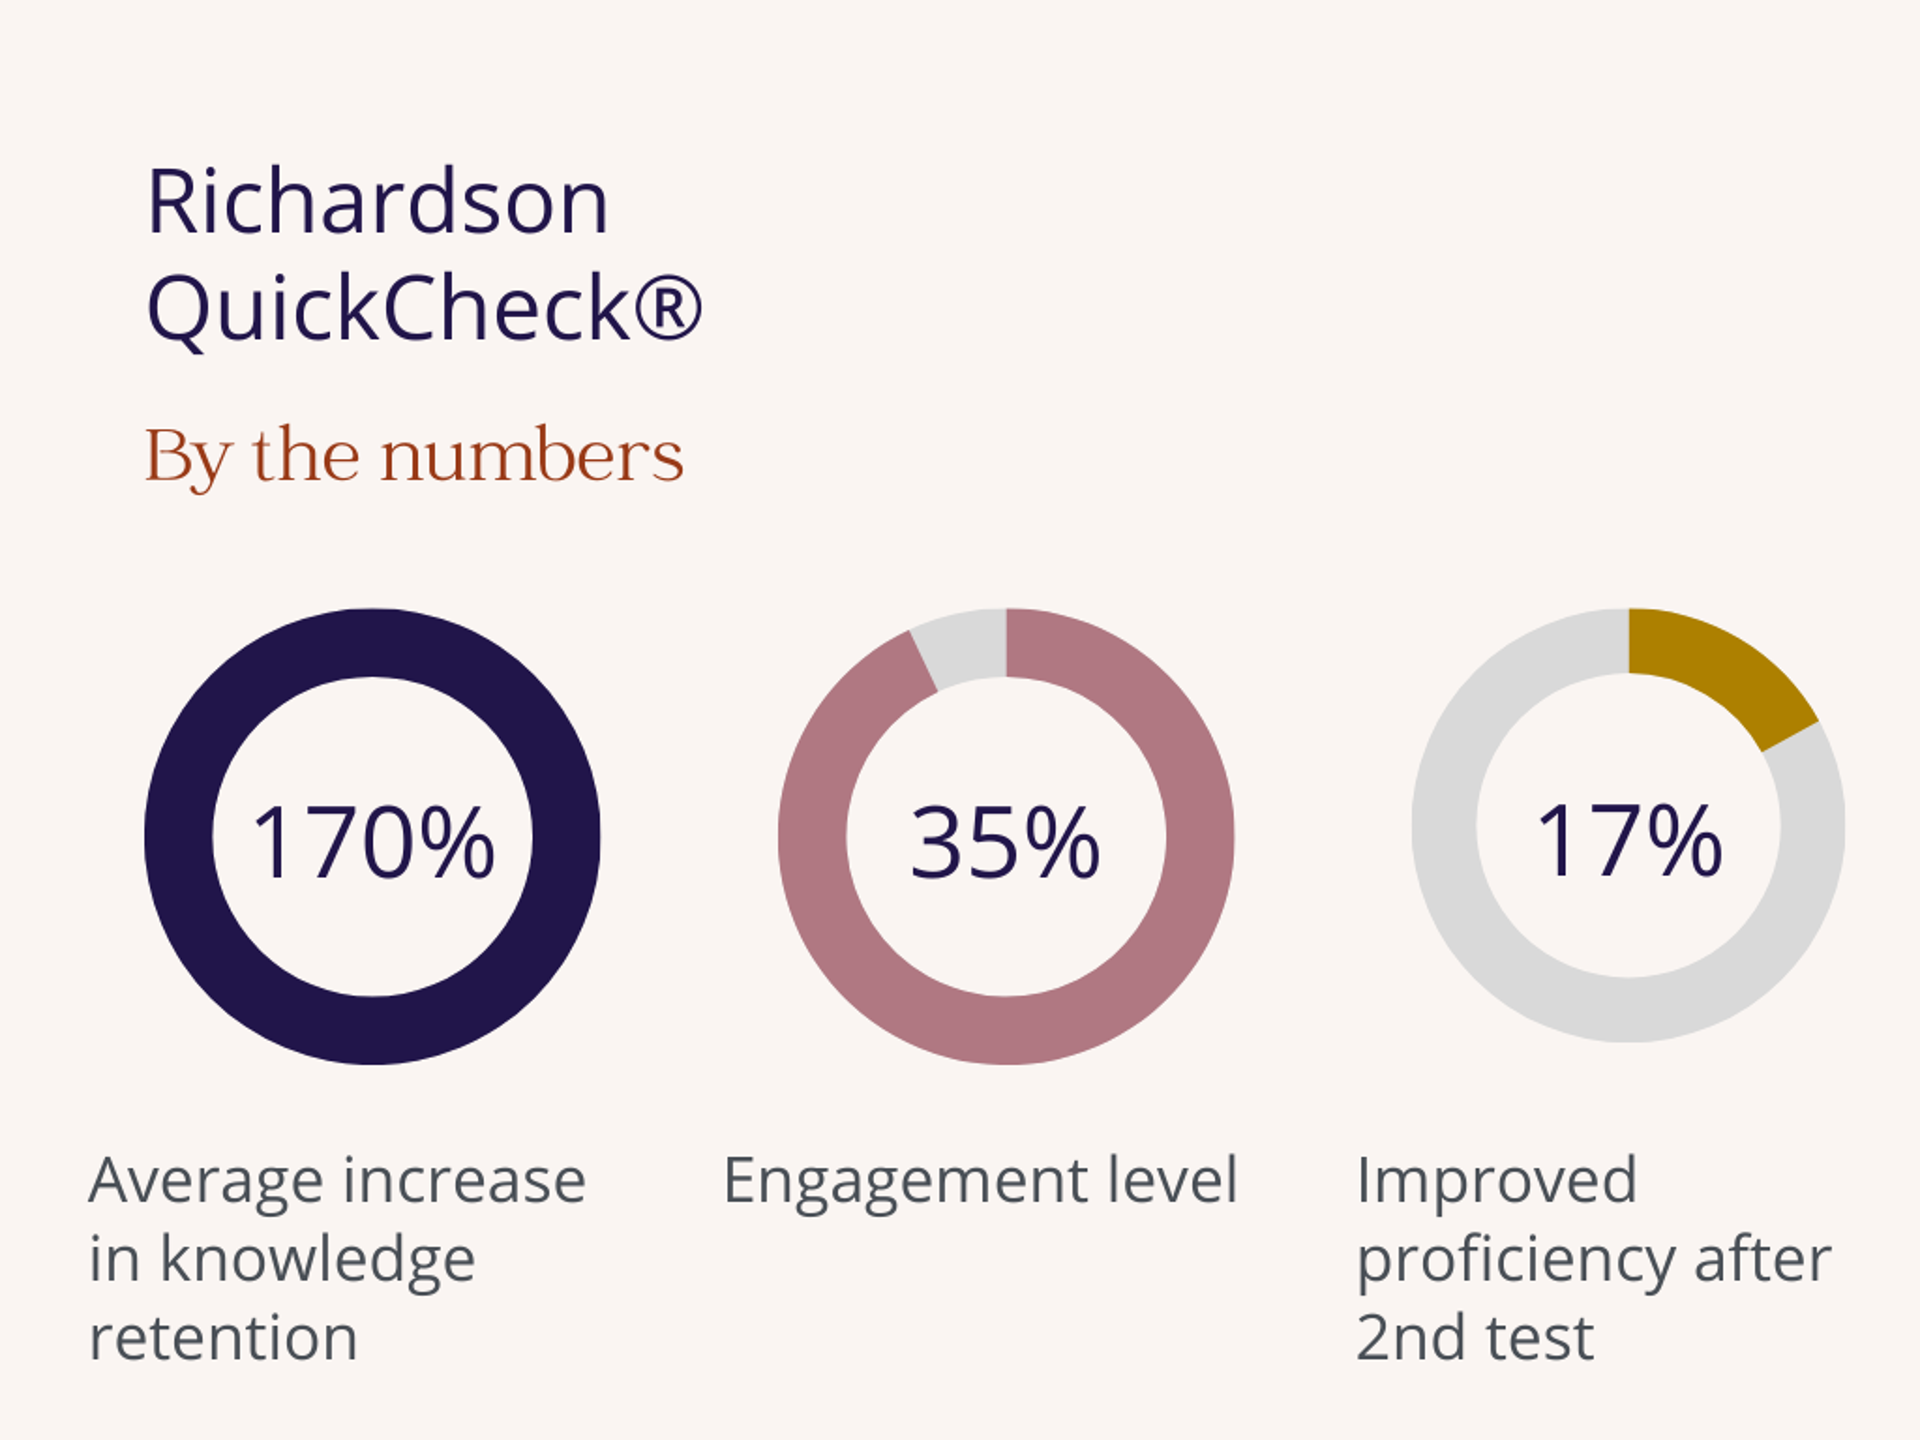 graphic showing stats about quickcheck including a 170% increase in knowledge retention, 35% engagement level, and 17% proficiency improvement